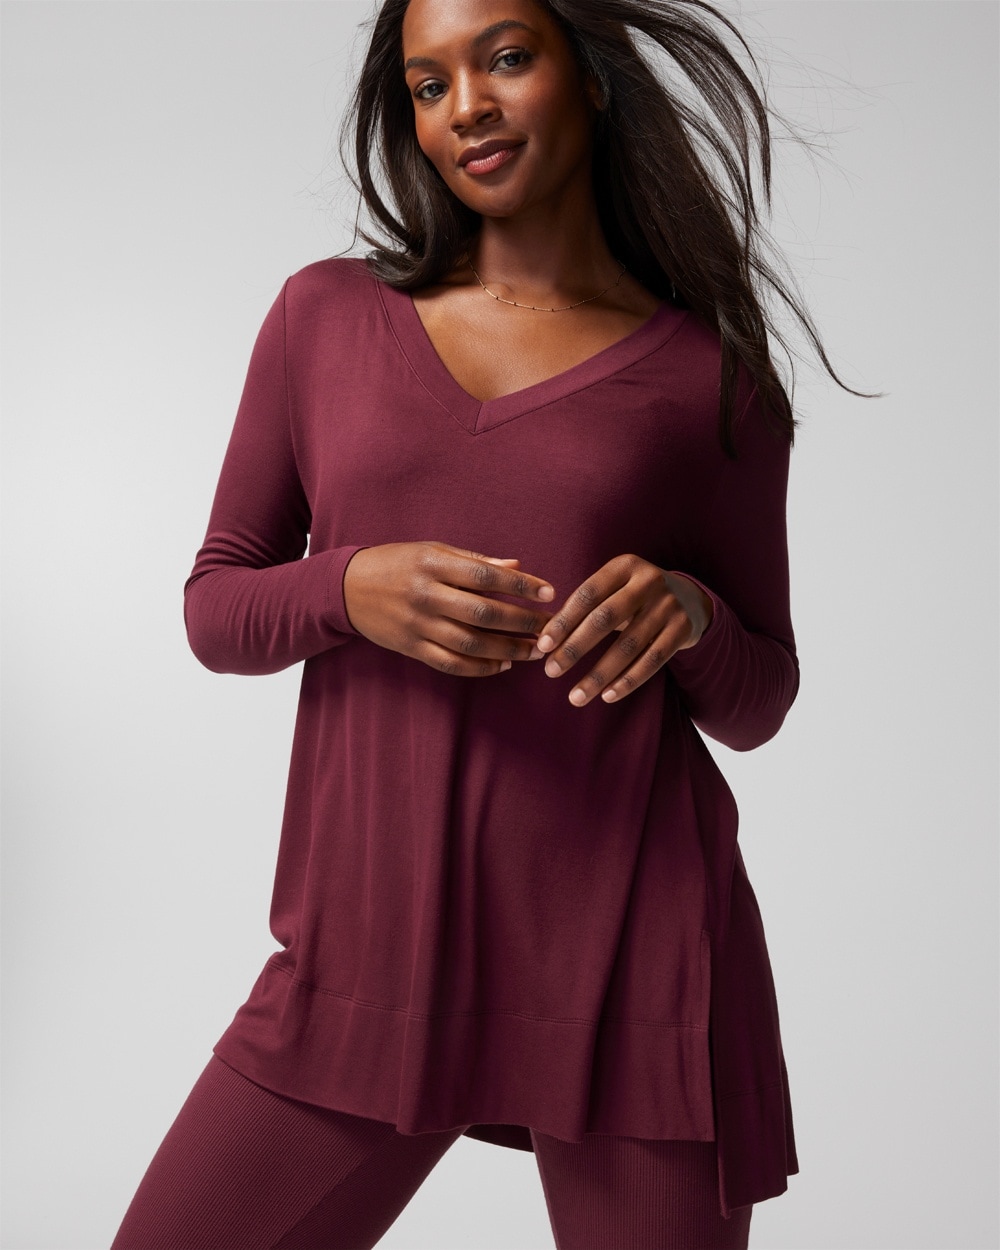 Cool Nights + Days Long-Sleeve V-Neck Top